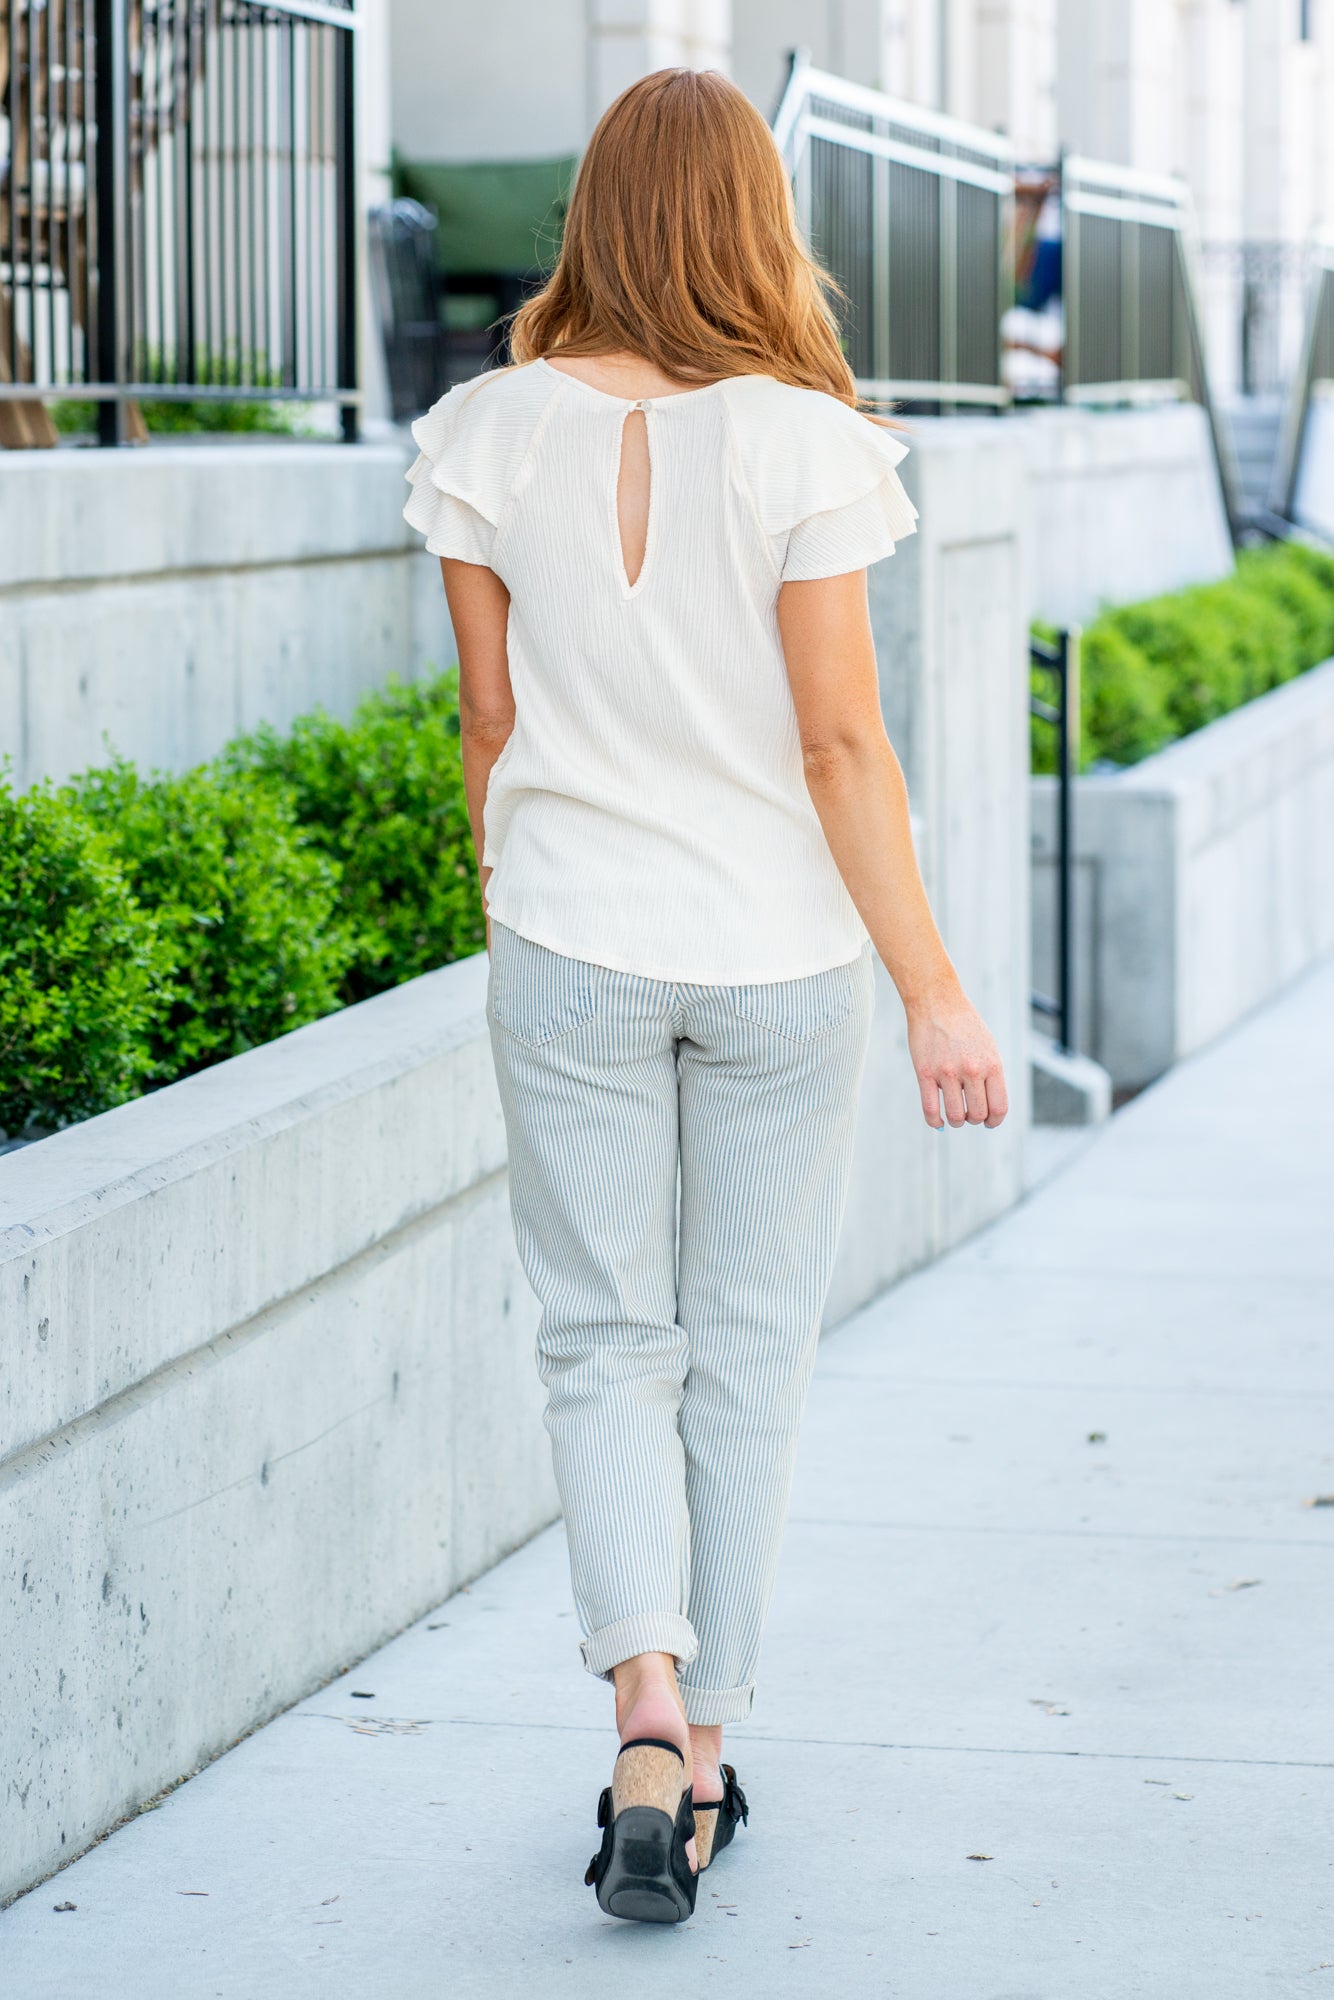 Ces Femme   Easy top that goes with everything, made of crinkle knit stretch fabric  Color: Ivory Crew Neck  Round Hemline Fitted Short-Sleeved 65%Polyester, 35%Rayon Style #: TJ10571SC Contact us for any additional measurements or sizing.